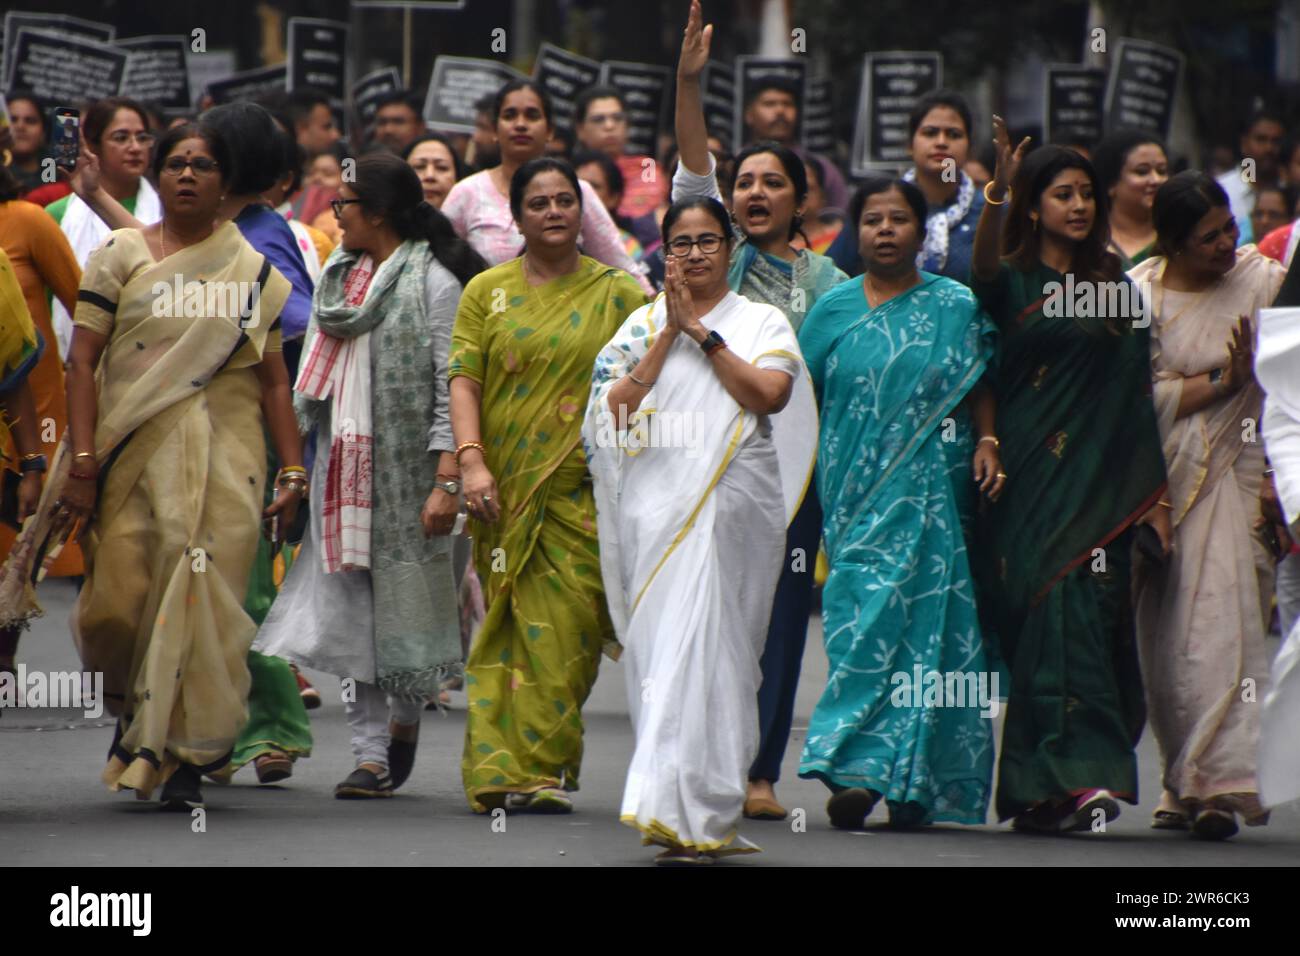 Kolkata, West Bengal, India. 7th Mar, 2024. West Bengal Chief Minister and Trinamool Supremo Mamata Banerjee led a women's rally in Kolkata today, responding to Prime Minister Narendra Modi's criticism of the Trinamool Congress over the Sandeshkhali issue. Women from Sandeshkhali island, where allegations against local Trinamool leaders have emerged, also joined. The rally, themed ''Mahilader Adhikar, Amader Angikar'' (women's rights, our commitment), featured Banerjee leading a foot march, accompanied by prominent Trinamool leaders like Sushmita Dev, Shashi Panja, and Rajya Sabha MP Sagarika Stock Photo